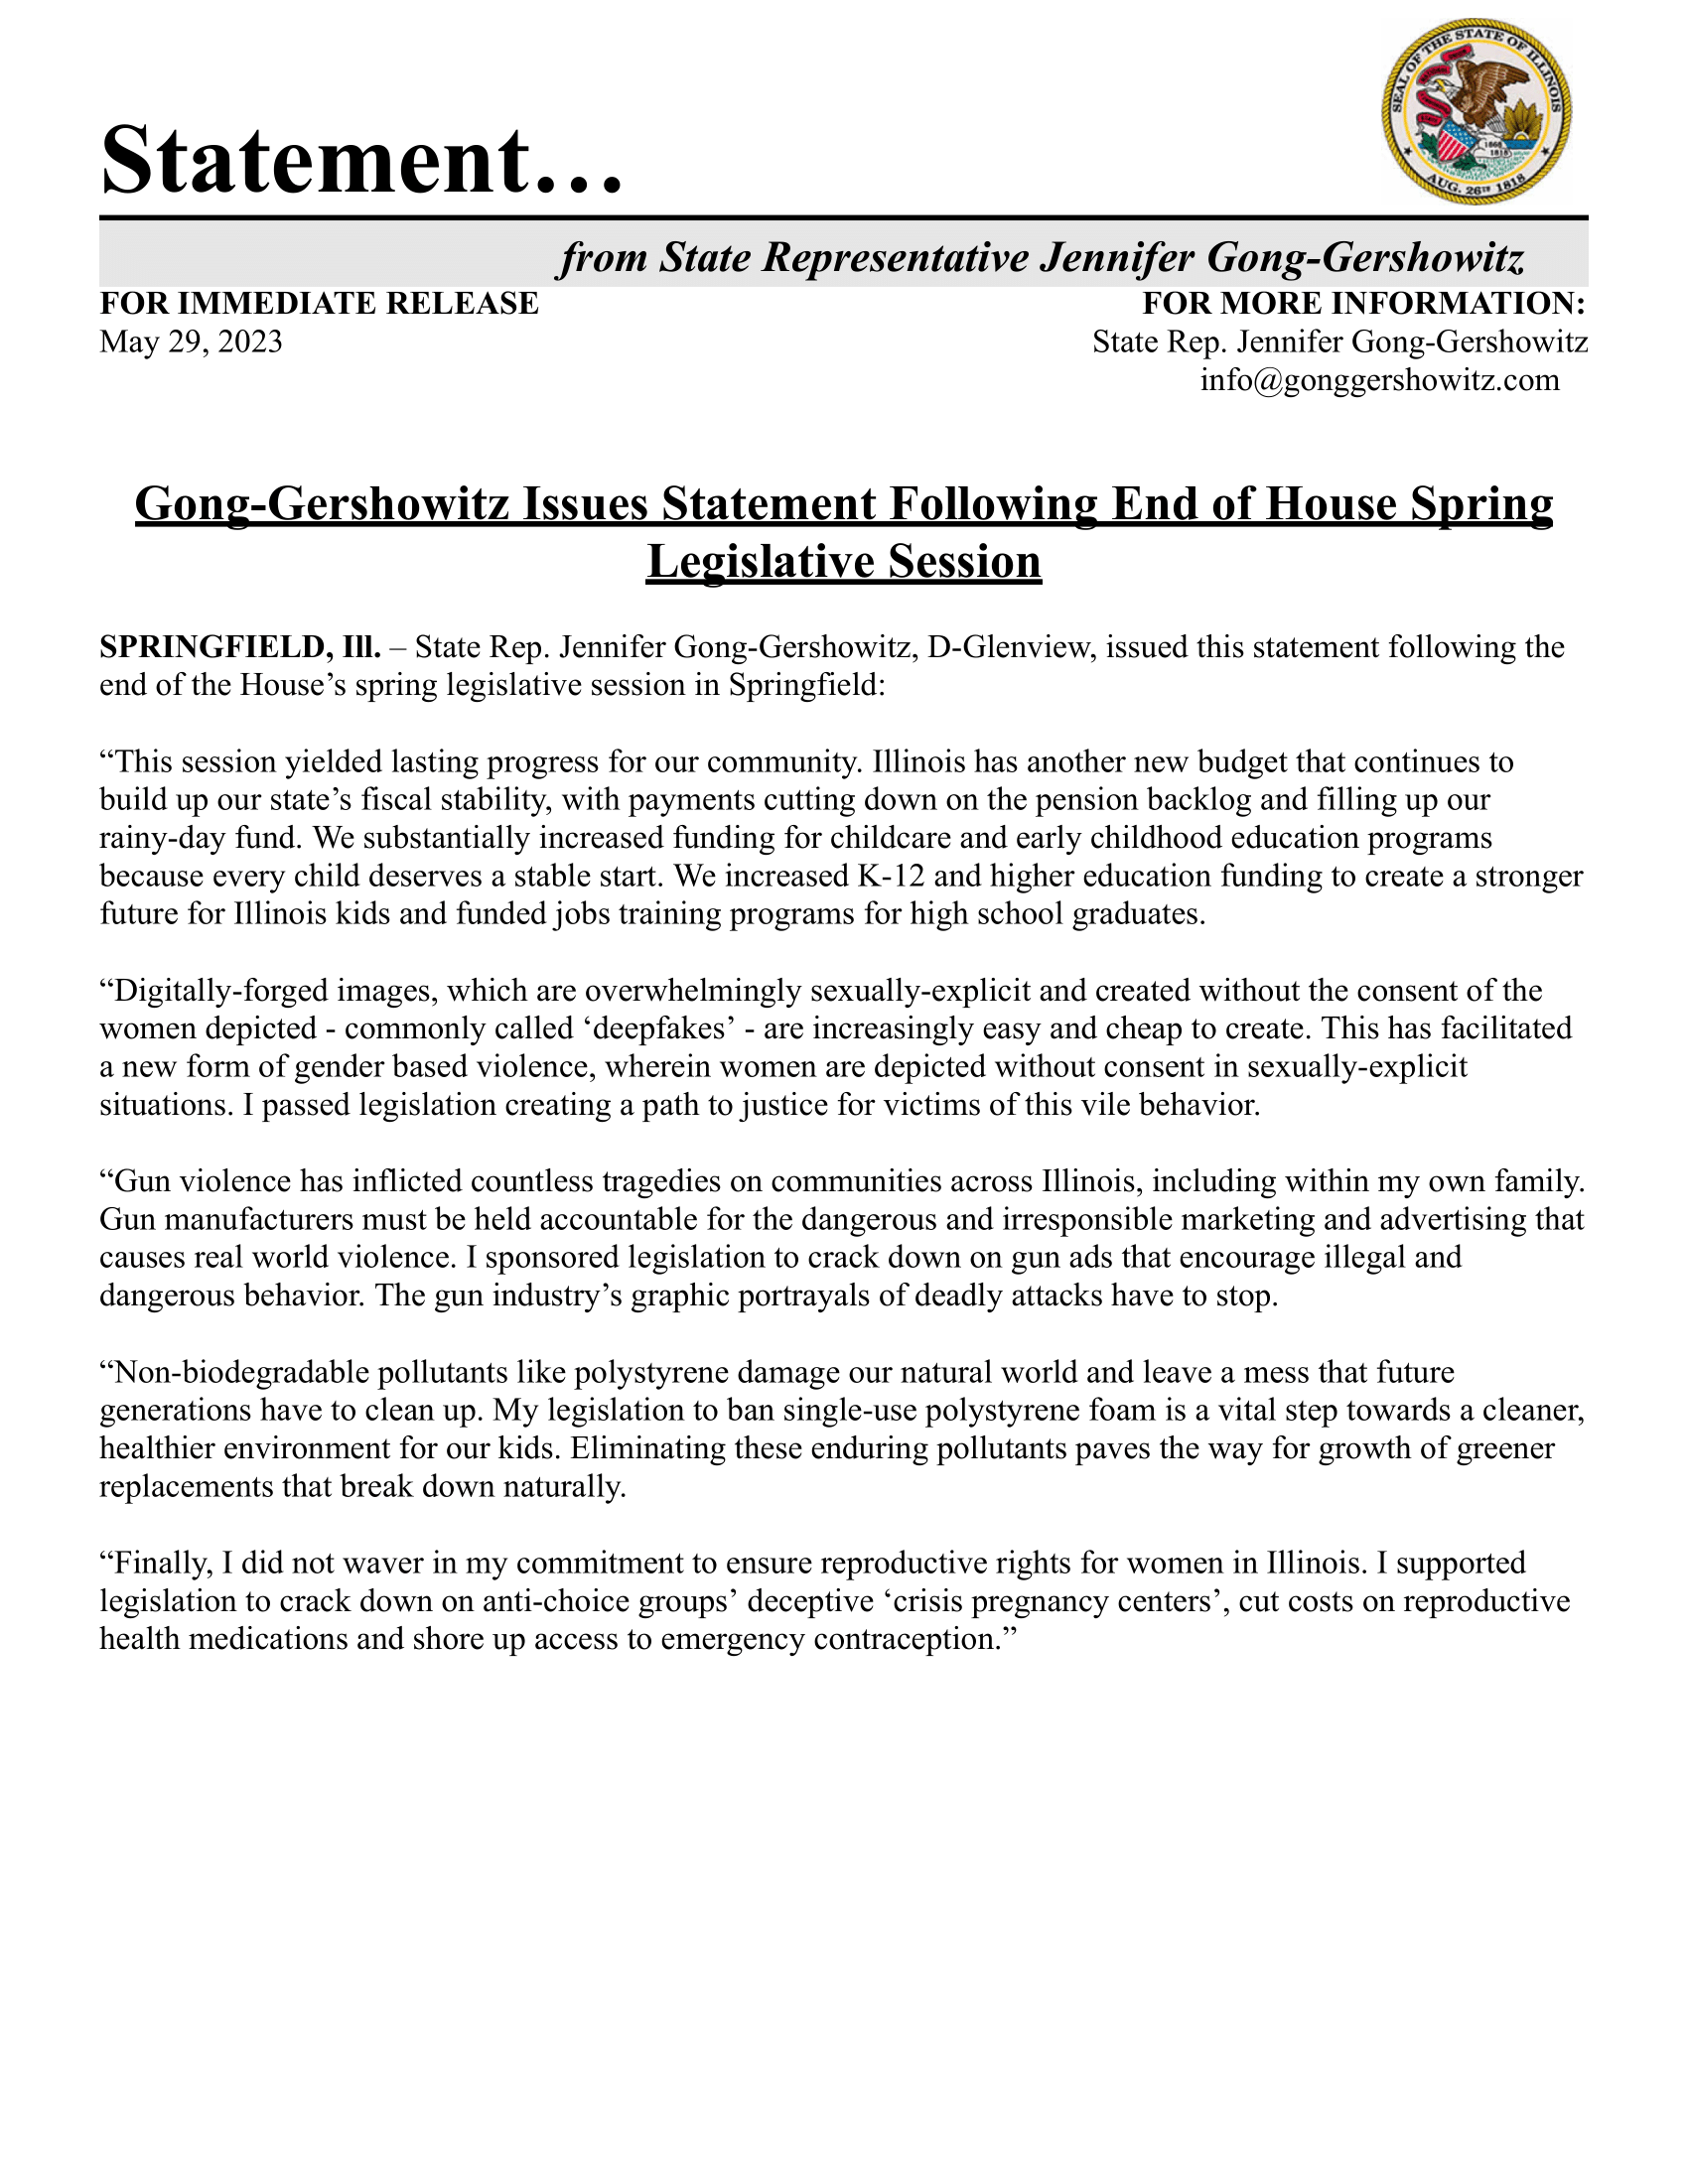 Gong-Gershowitz Issues Statement Following End of House Spring Legislative Session